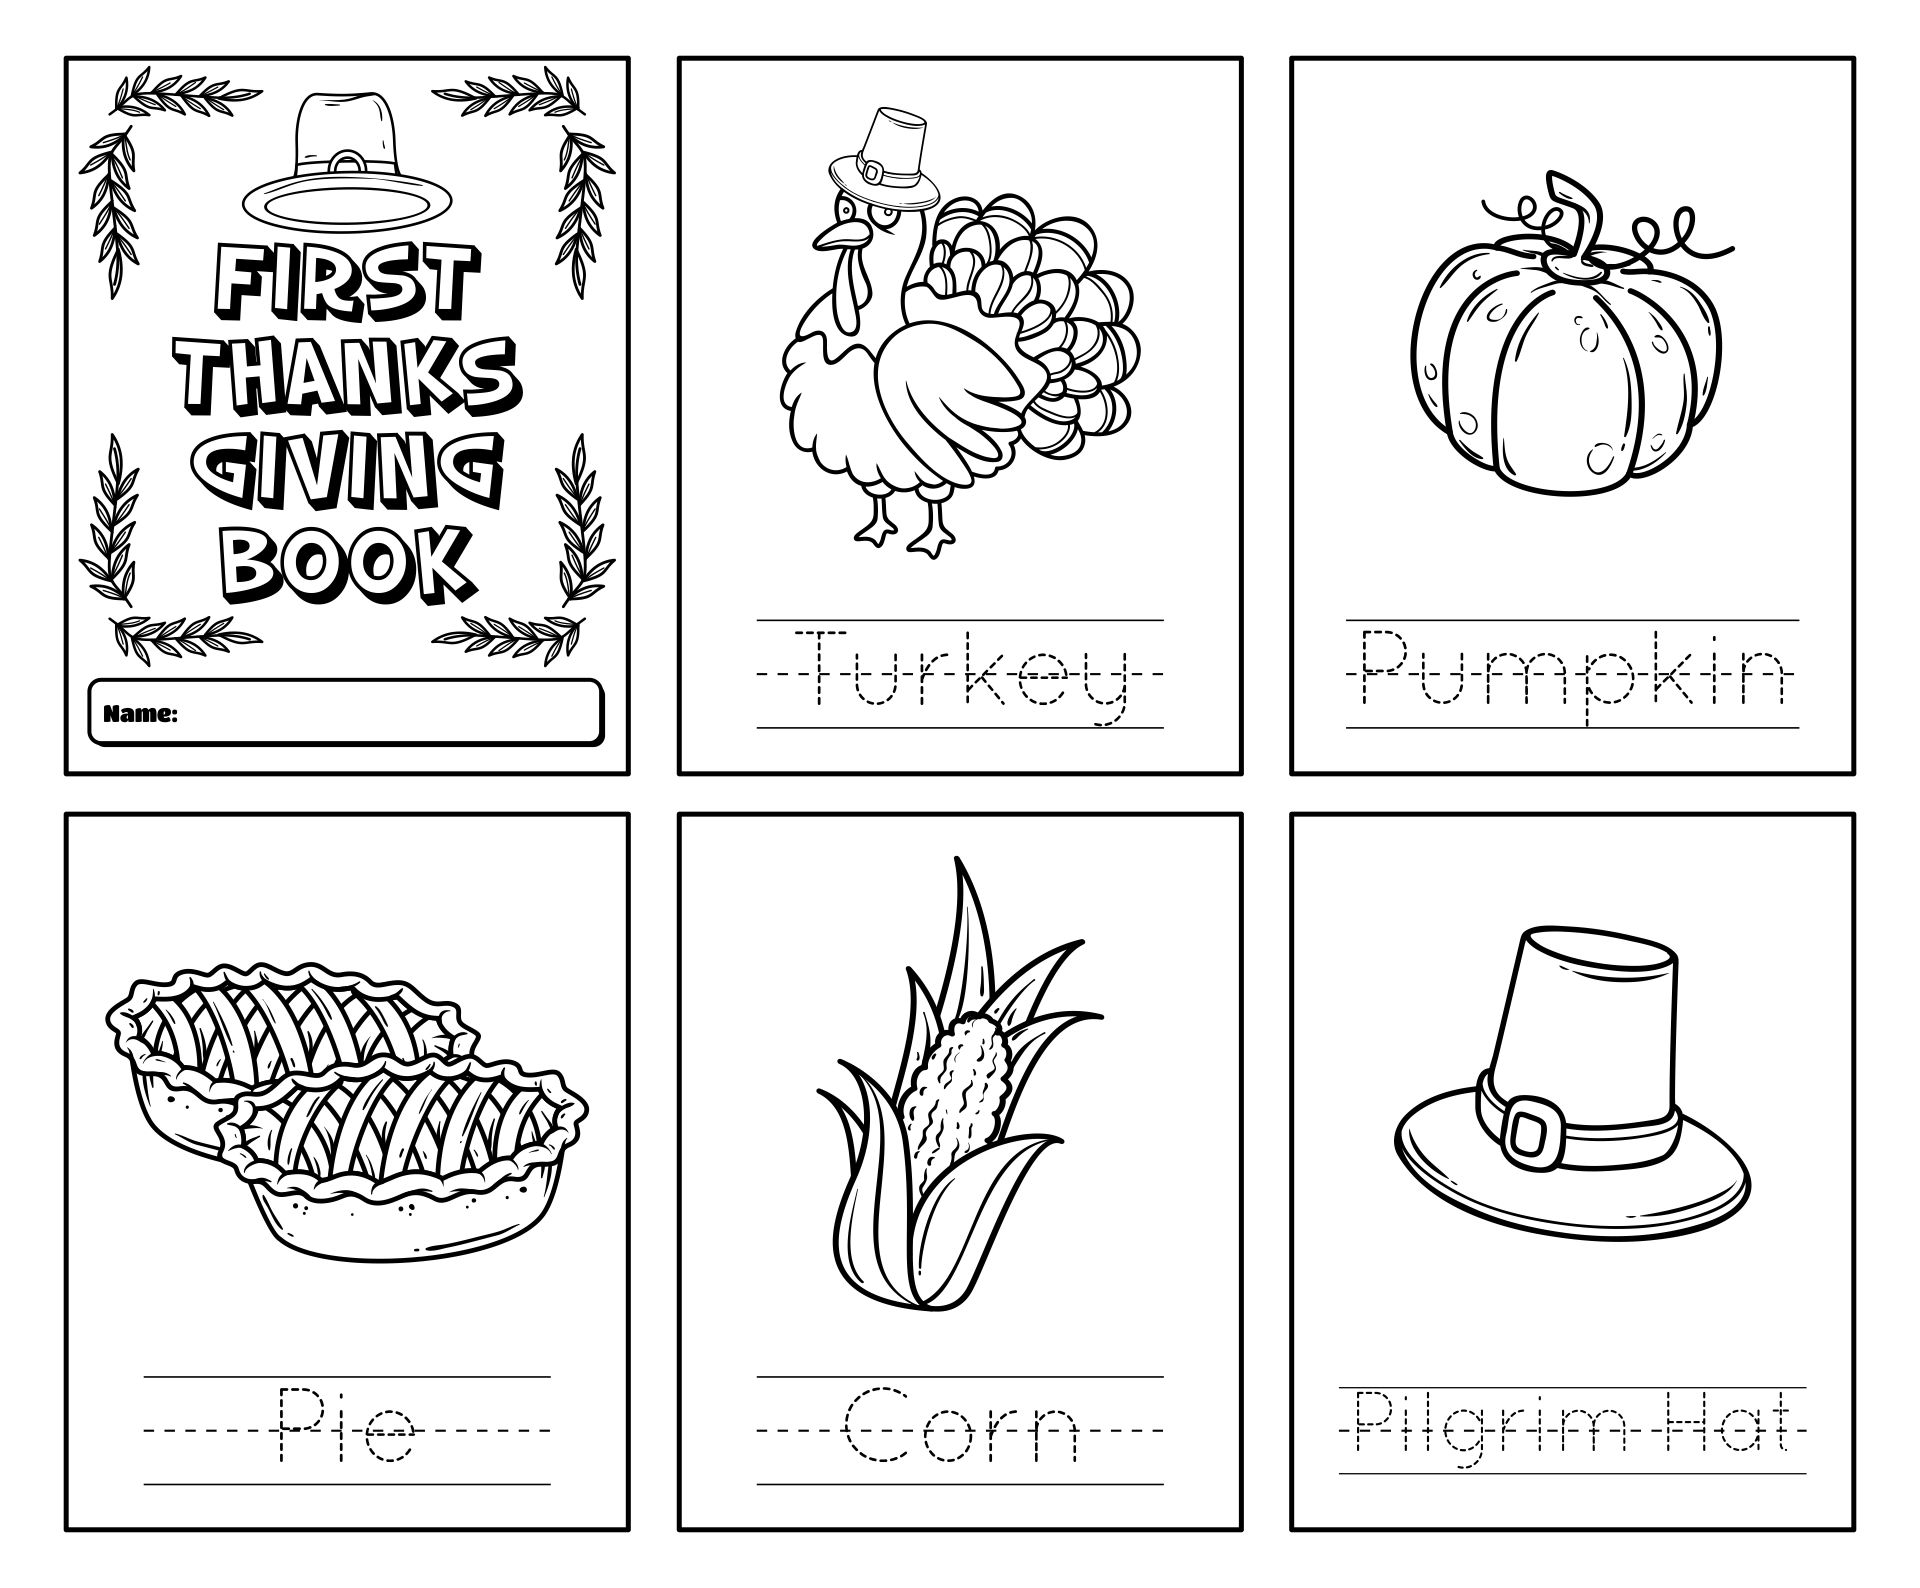 First Thanksgiving Book Printable